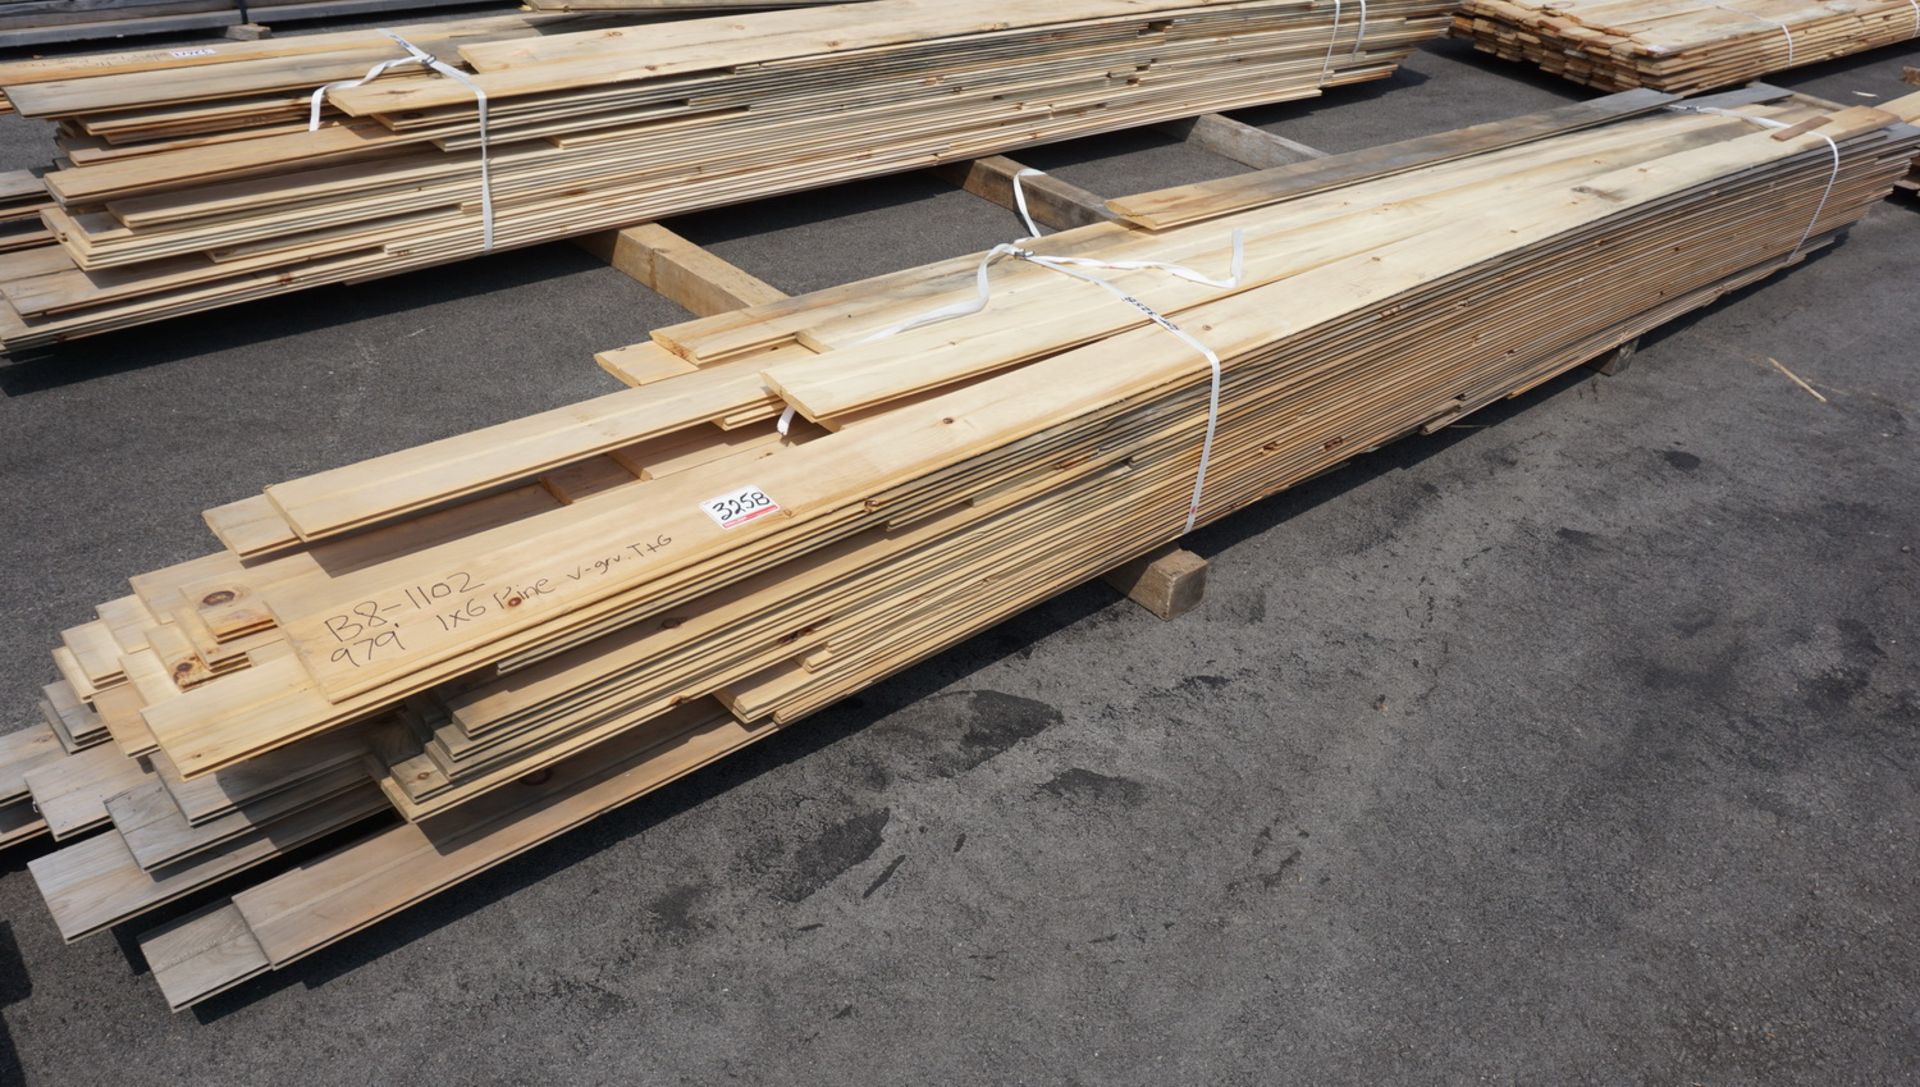 LOT - 979' OF 1" X 6 PINE TONGUE & GROOVE LUMBER (V-GROOVE)